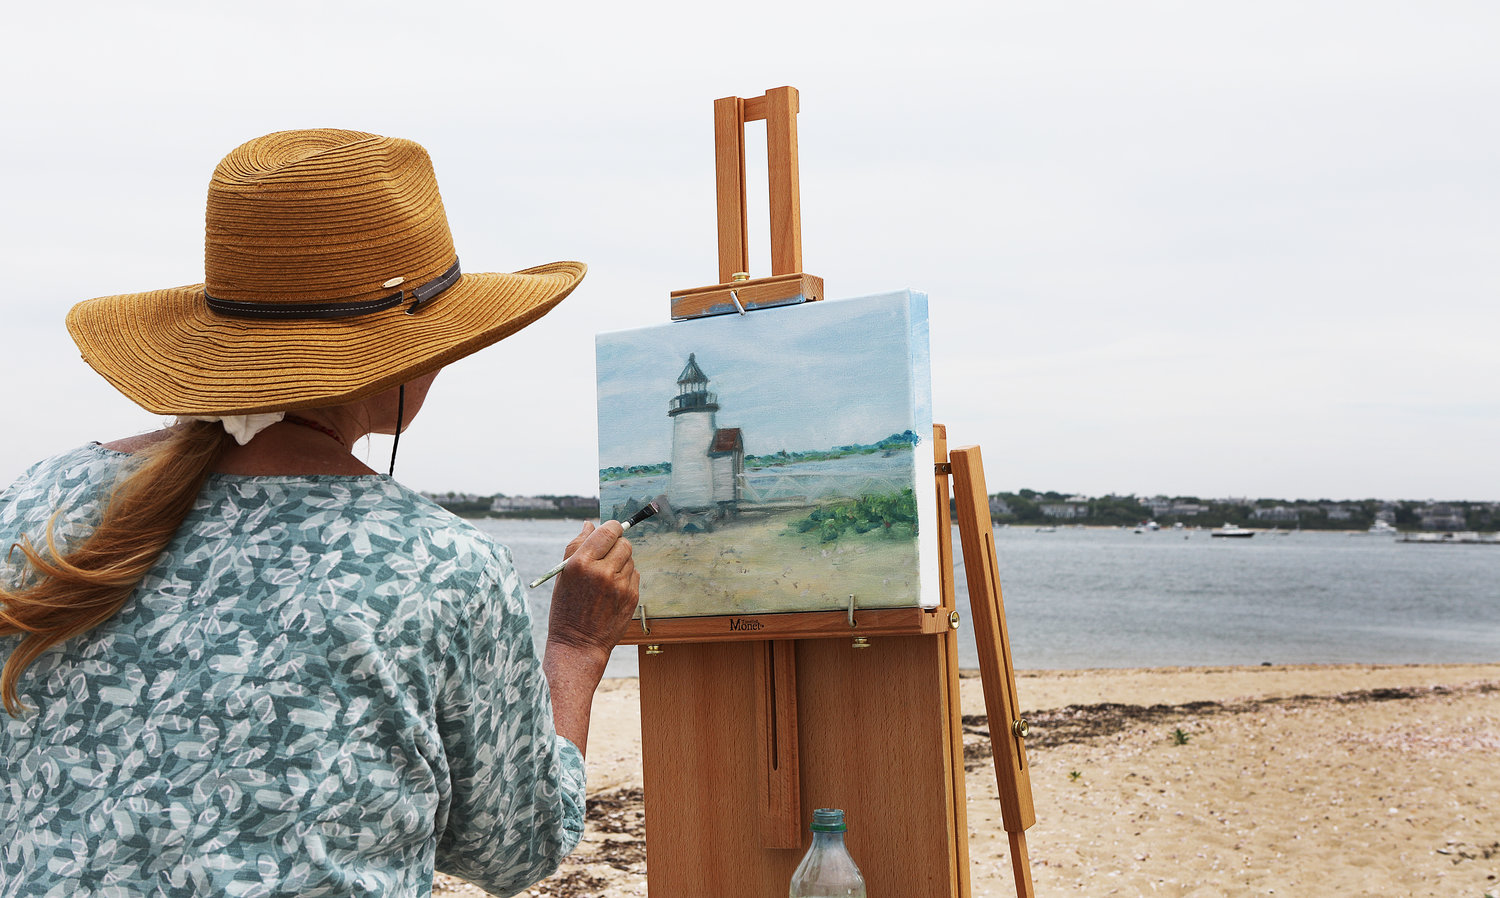 Island artist Valeri Arnold-Osley participates in Brant Point Paint Out, a plein air event sponsored by the Artists Association of Nantucket in June.